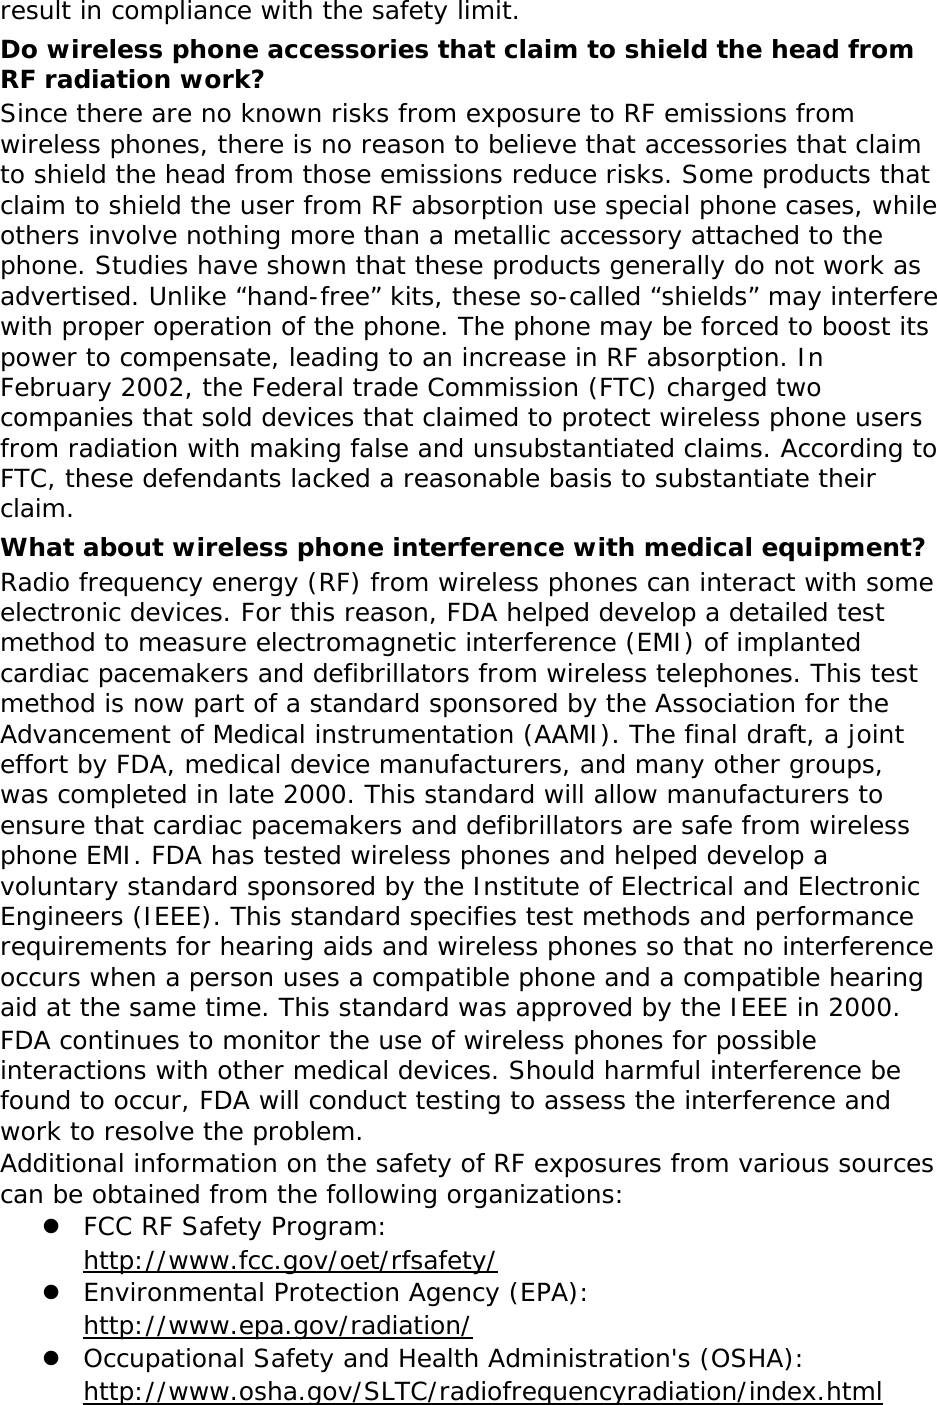 result in compliance with the safety limit. Do wireless phone accessories that claim to shield the head from RF radiation work? Since there are no known risks from exposure to RF emissions from wireless phones, there is no reason to believe that accessories that claim to shield the head from those emissions reduce risks. Some products that claim to shield the user from RF absorption use special phone cases, while others involve nothing more than a metallic accessory attached to the phone. Studies have shown that these products generally do not work as advertised. Unlike “hand-free” kits, these so-called “shields” may interfere with proper operation of the phone. The phone may be forced to boost its power to compensate, leading to an increase in RF absorption. In February 2002, the Federal trade Commission (FTC) charged two companies that sold devices that claimed to protect wireless phone users from radiation with making false and unsubstantiated claims. According to FTC, these defendants lacked a reasonable basis to substantiate their claim. What about wireless phone interference with medical equipment? Radio frequency energy (RF) from wireless phones can interact with some electronic devices. For this reason, FDA helped develop a detailed test method to measure electromagnetic interference (EMI) of implanted cardiac pacemakers and defibrillators from wireless telephones. This test method is now part of a standard sponsored by the Association for the Advancement of Medical instrumentation (AAMI). The final draft, a joint effort by FDA, medical device manufacturers, and many other groups, was completed in late 2000. This standard will allow manufacturers to ensure that cardiac pacemakers and defibrillators are safe from wireless phone EMI. FDA has tested wireless phones and helped develop a voluntary standard sponsored by the Institute of Electrical and Electronic Engineers (IEEE). This standard specifies test methods and performance requirements for hearing aids and wireless phones so that no interference occurs when a person uses a compatible phone and a compatible hearing aid at the same time. This standard was approved by the IEEE in 2000. FDA continues to monitor the use of wireless phones for possible interactions with other medical devices. Should harmful interference be found to occur, FDA will conduct testing to assess the interference and work to resolve the problem. Additional information on the safety of RF exposures from various sources can be obtained from the following organizations:  FCC RF Safety Program:   Environmental Protection Agency (EPA): http://www.fcc.gov/oet/rfsafety/   Occupational Safety and Health Administration&apos;s (OSHA):  http://www.epa.gov/radiation/      http://www.osha.gov/SLTC/radiofrequencyradiation/index.html 